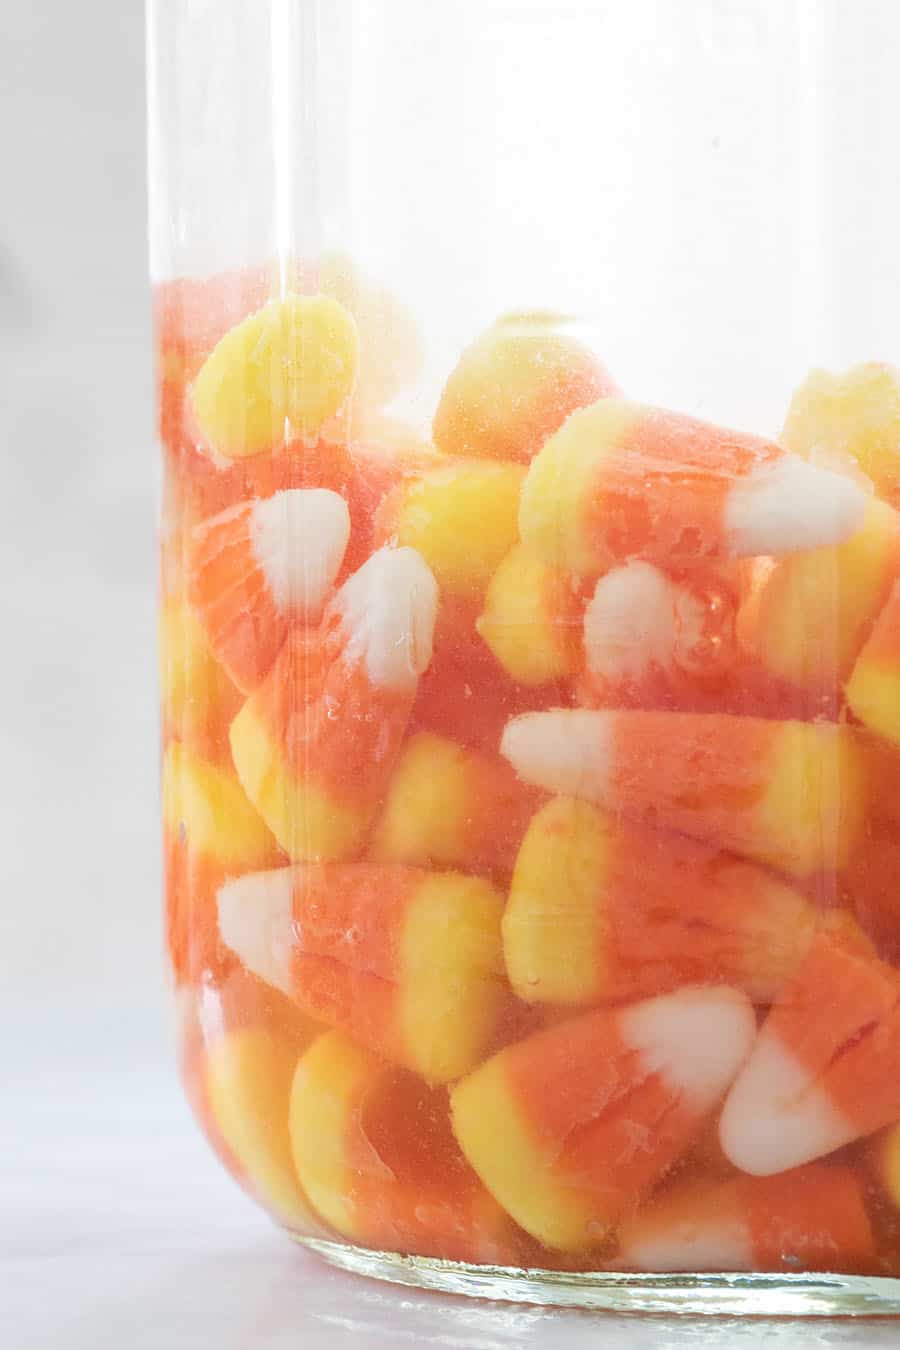 Vodka and candy corn in a glass jar.